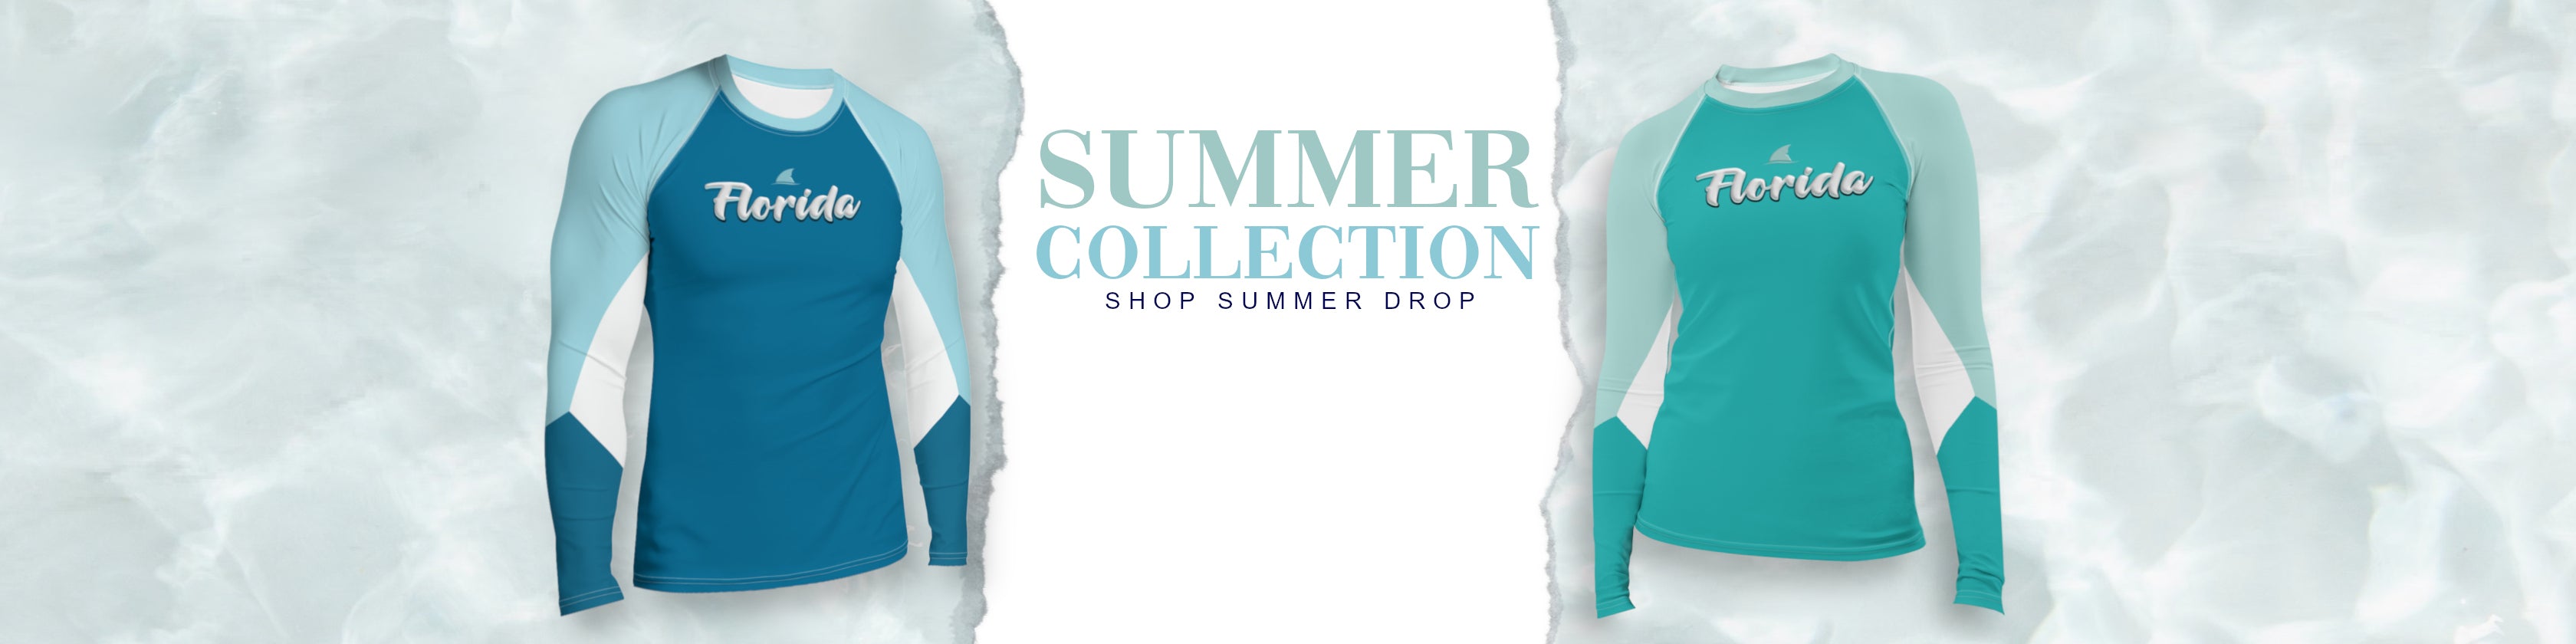 shopify-arczeal-designs-banner-home-page-summer-swimwear-collection